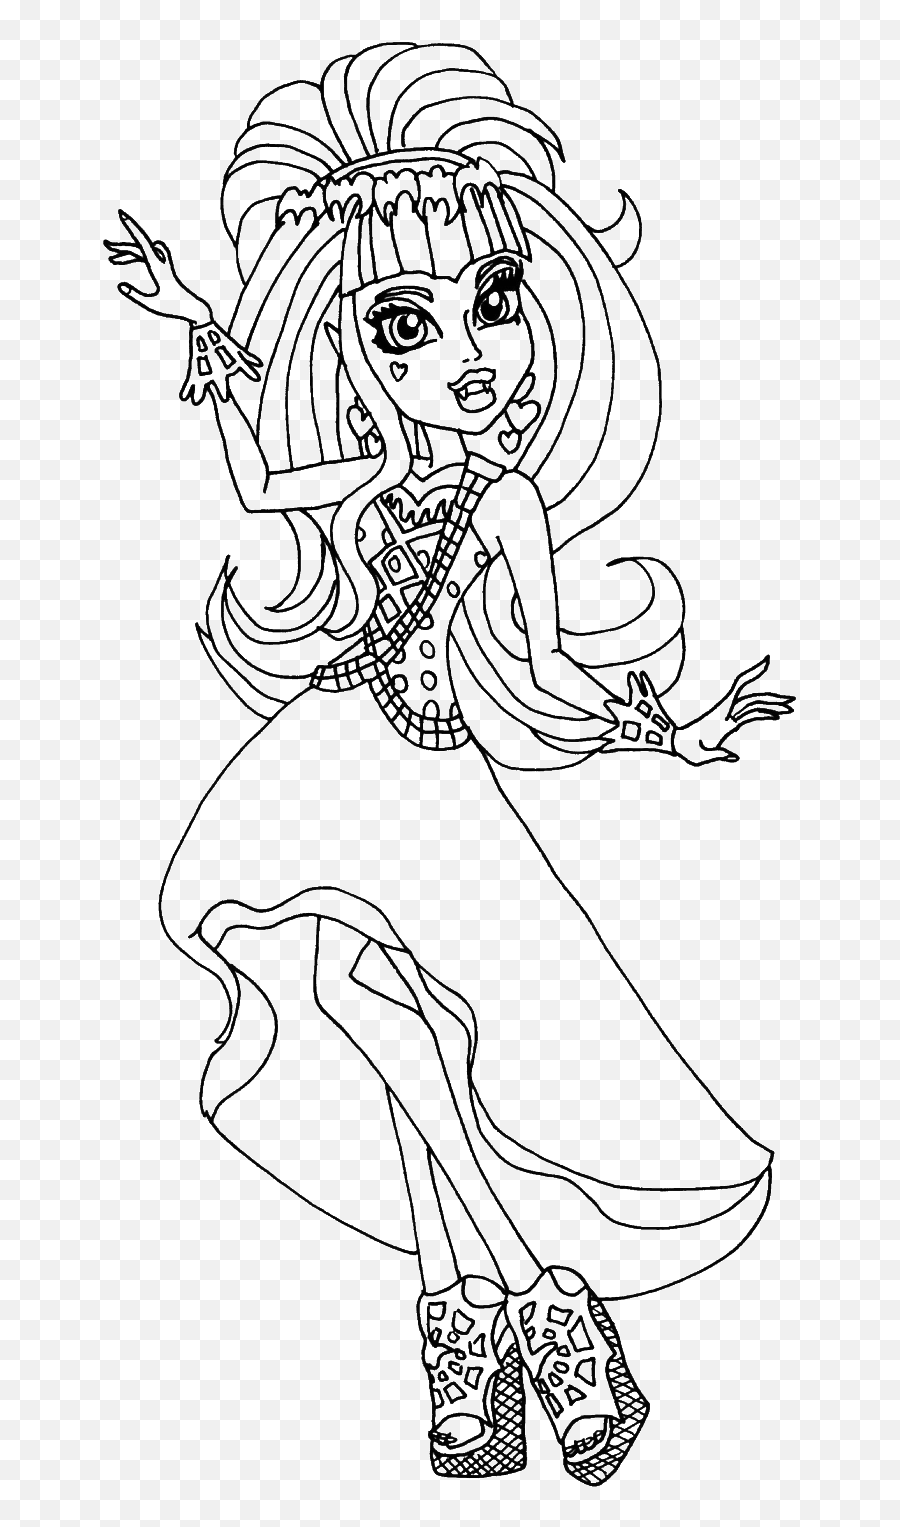 Draculaura Performing At The Dance Scene Coloring Pages - Coloring The Name Brianna Emoji,Cute Emoji Coloring Pages